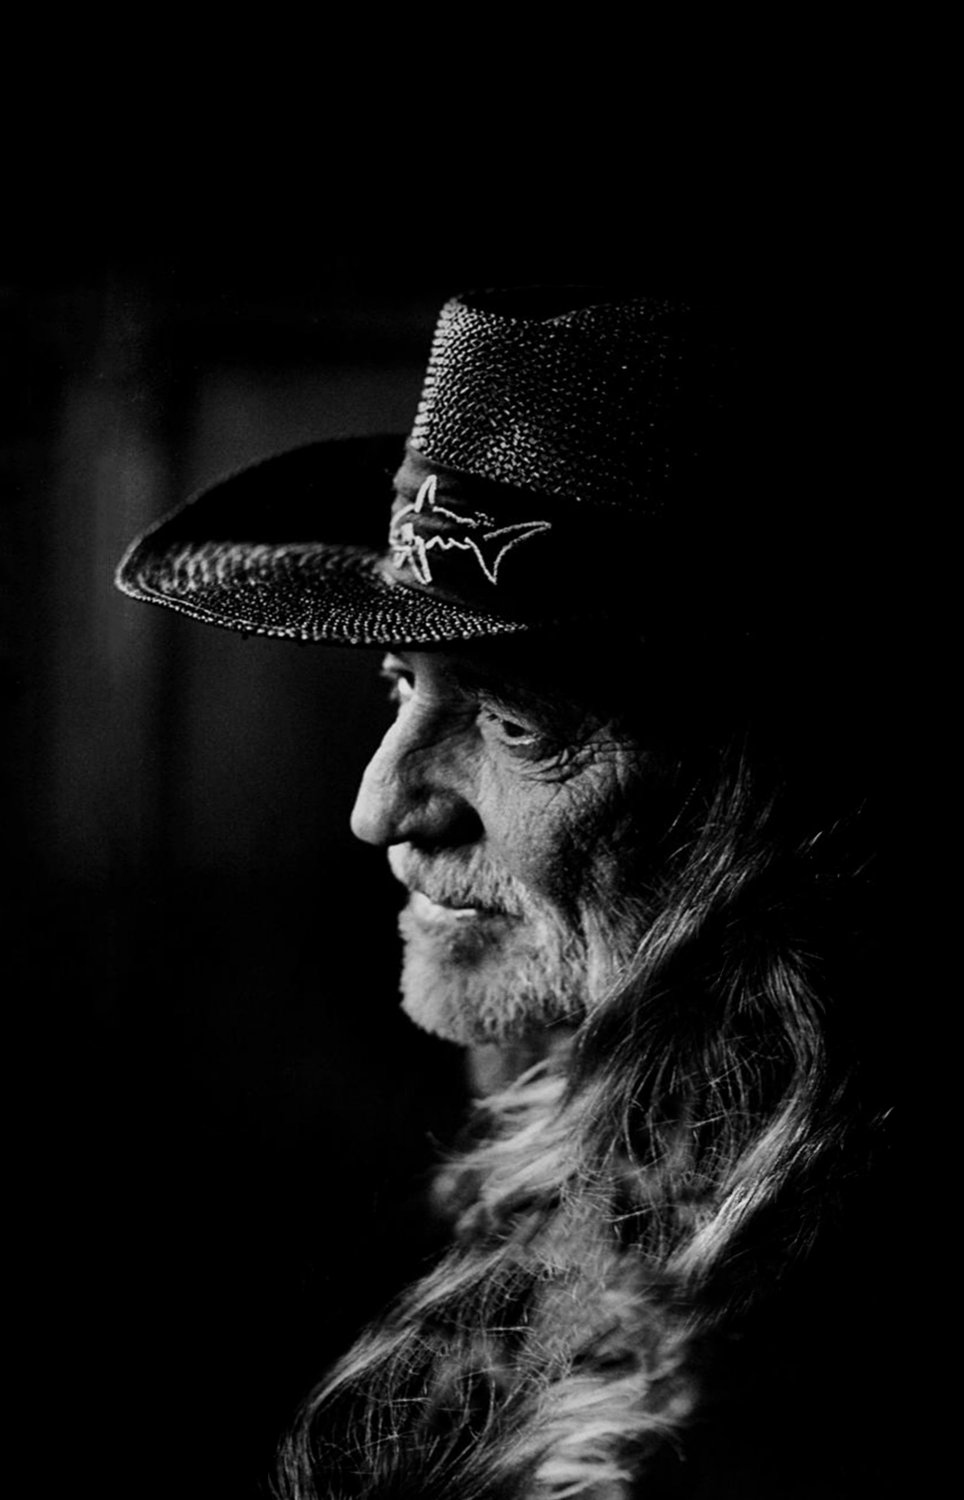 Willie Nelson  13"x19" (32cm/49cm) Polyester Fabric Poster